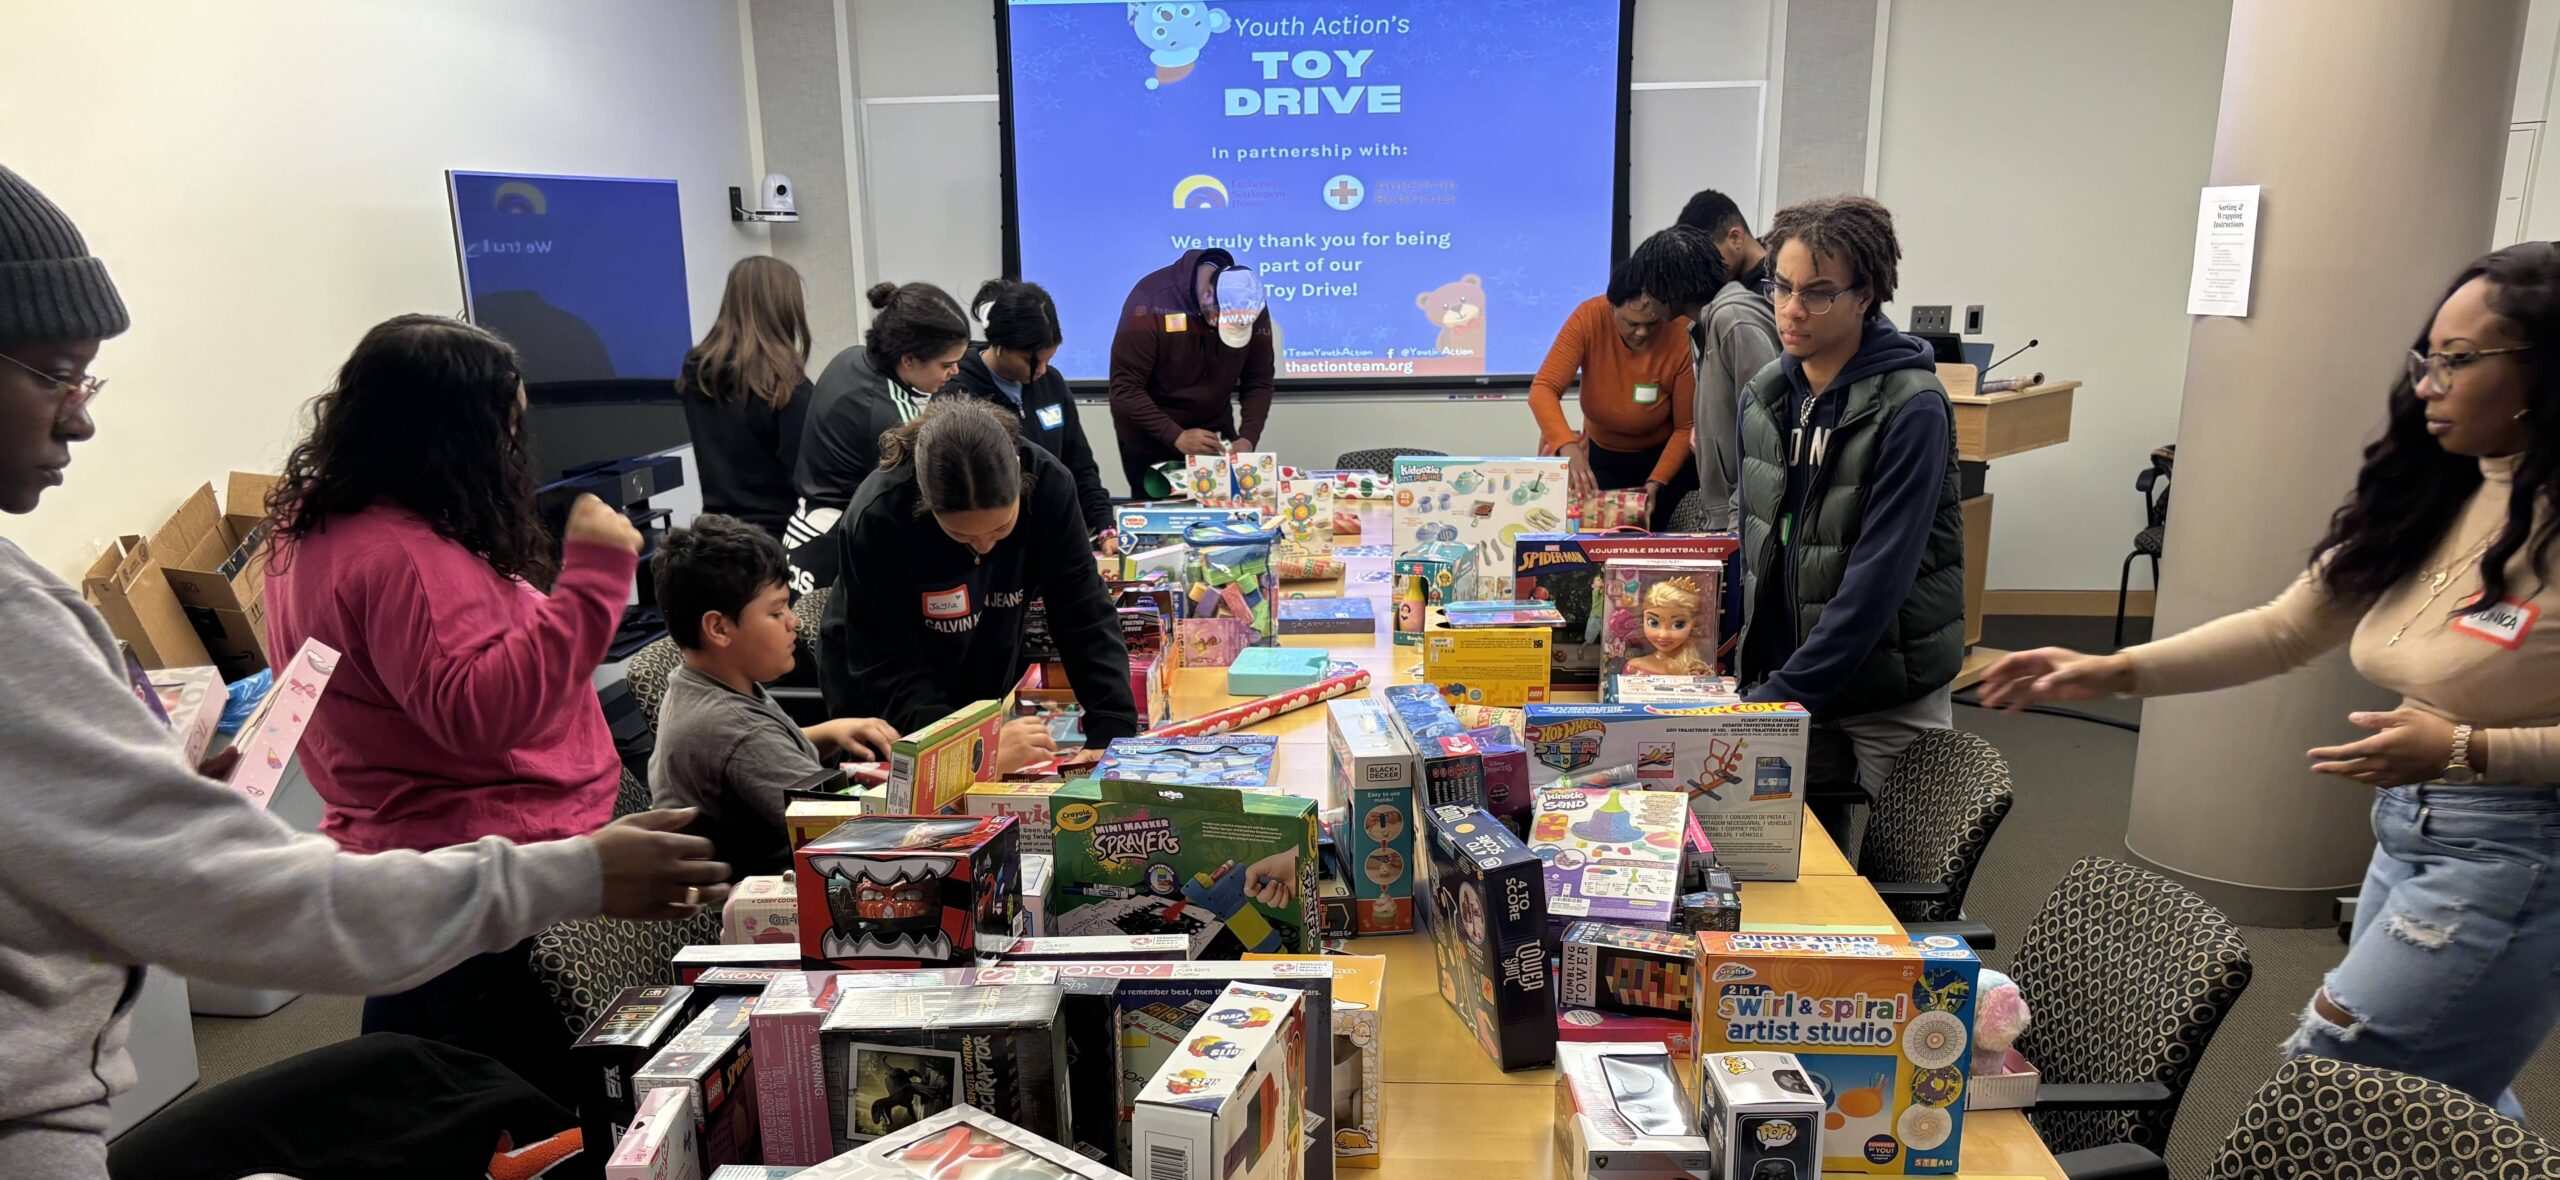 Youth Action 2023 Toy Drive